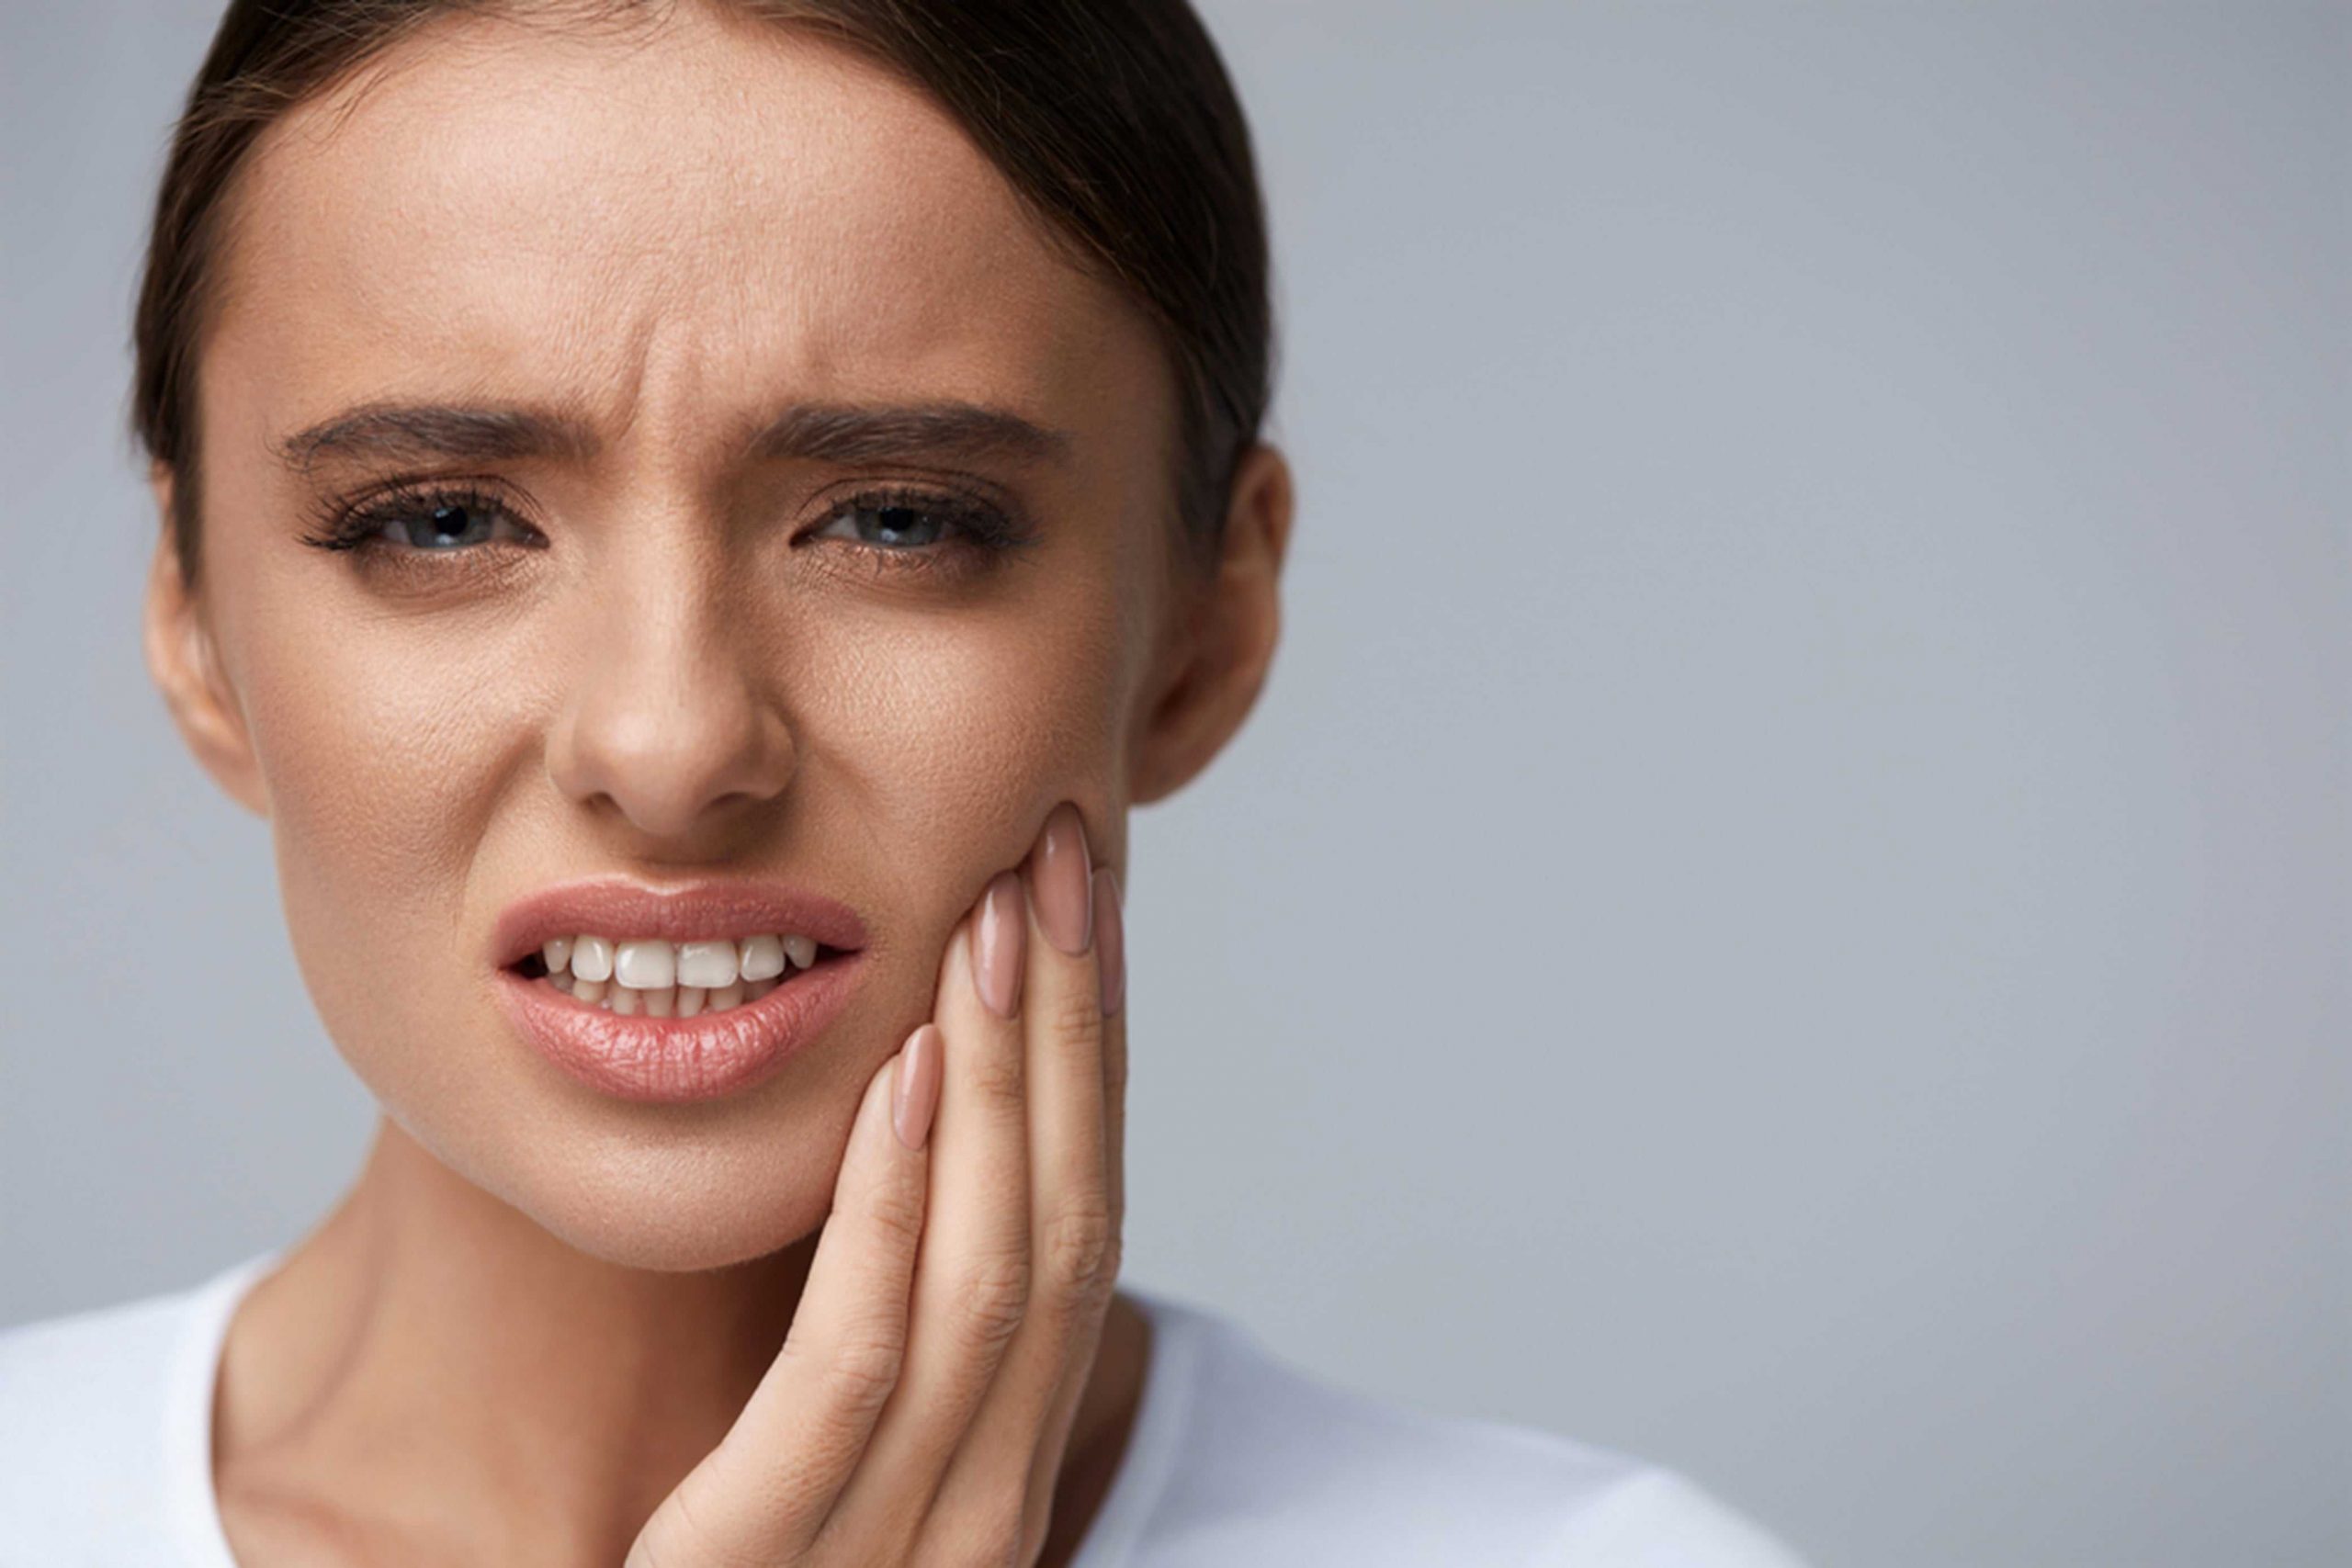 7 Effective Natural Remedies to Relieve Wisdom Tooth Pain